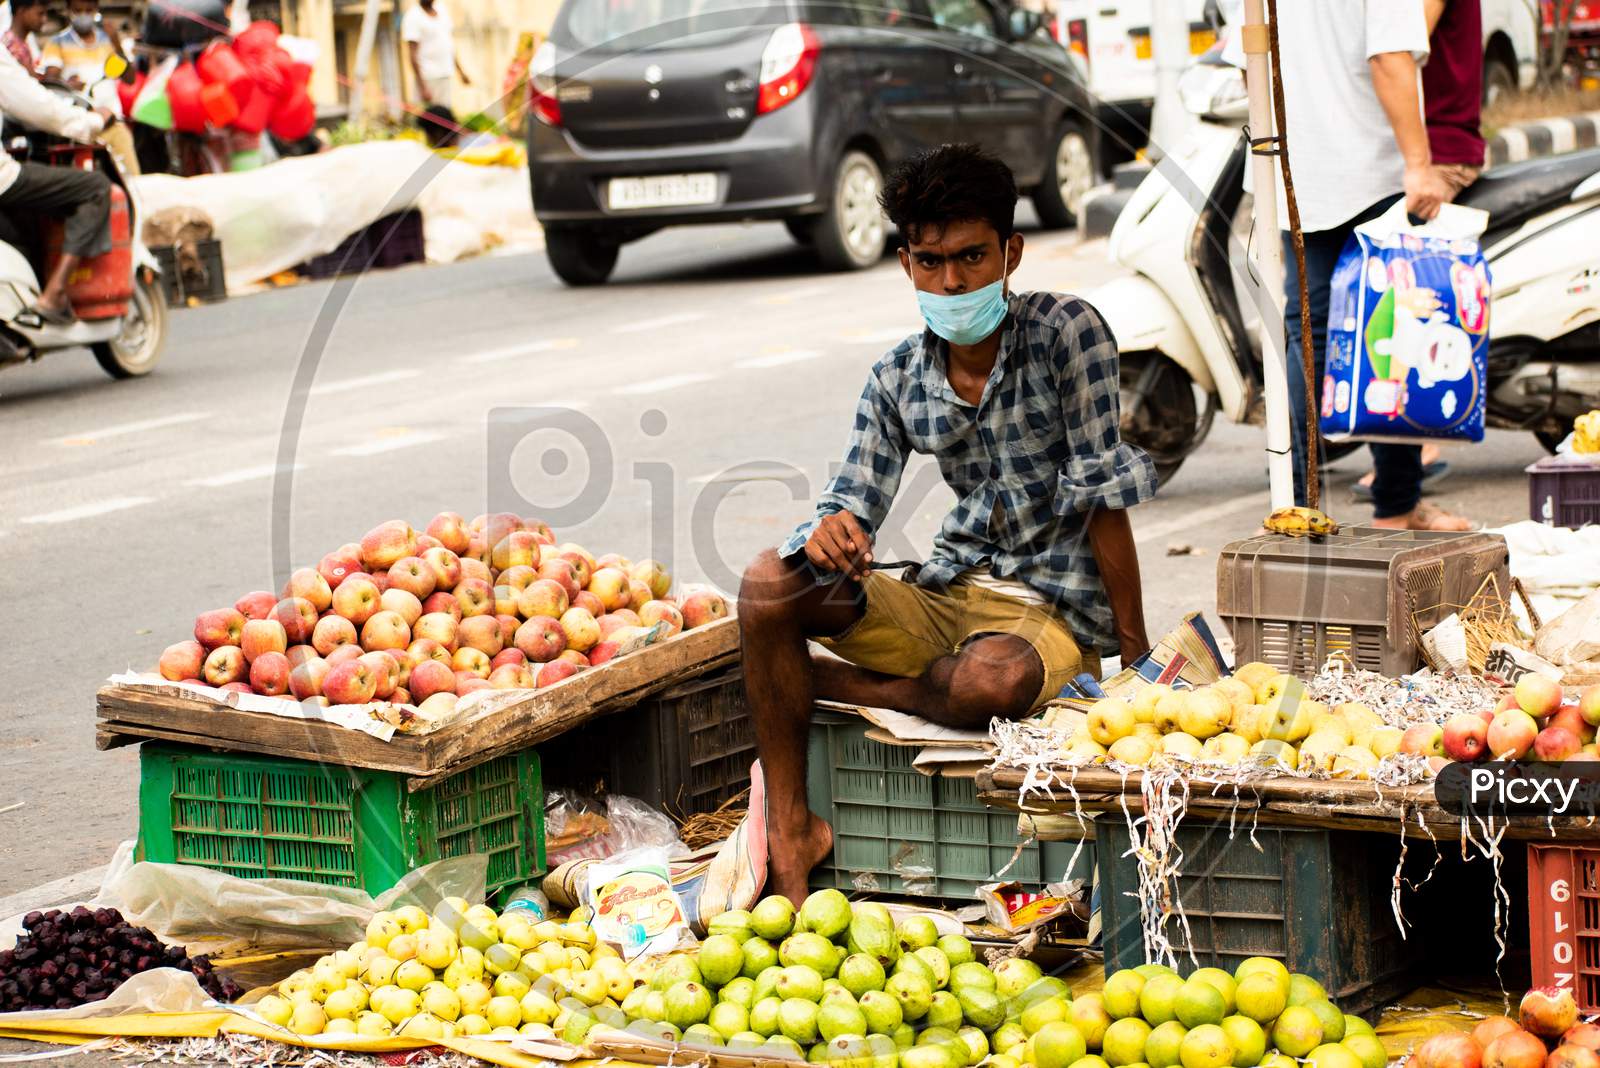 An unidentified vendor selling vegetables in weekly market